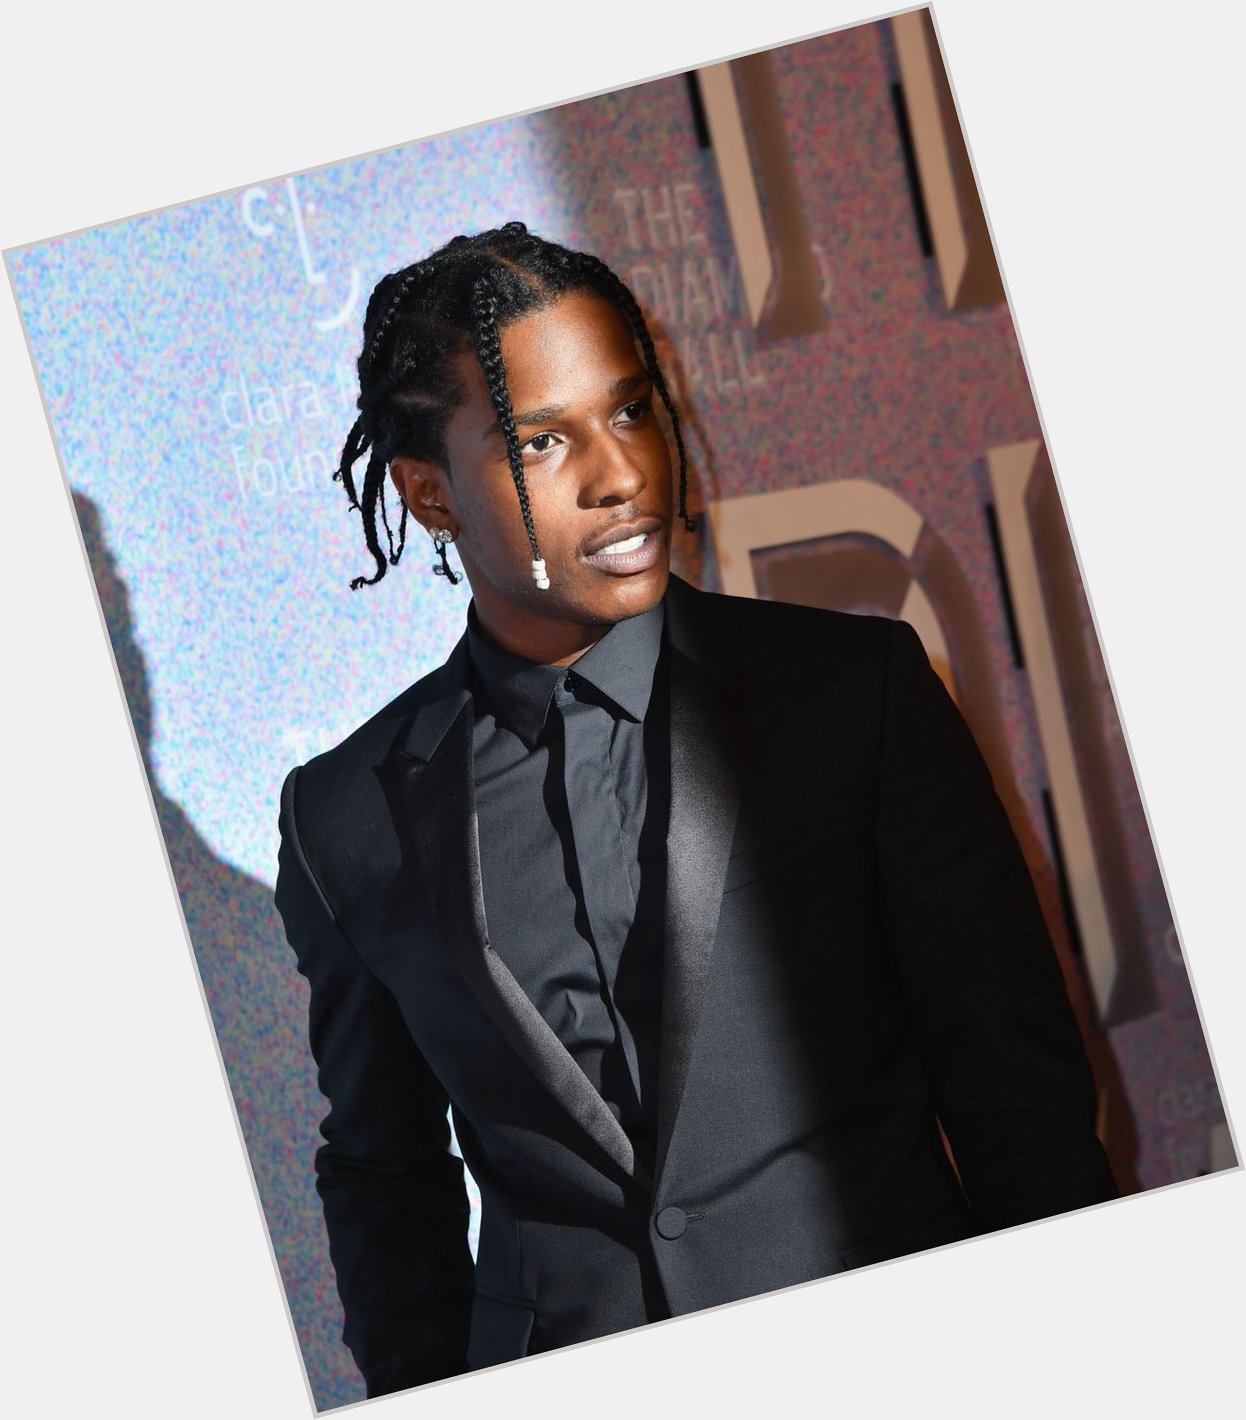 Happy 32nd birthday to ASAP Rocky favorite song from him? 